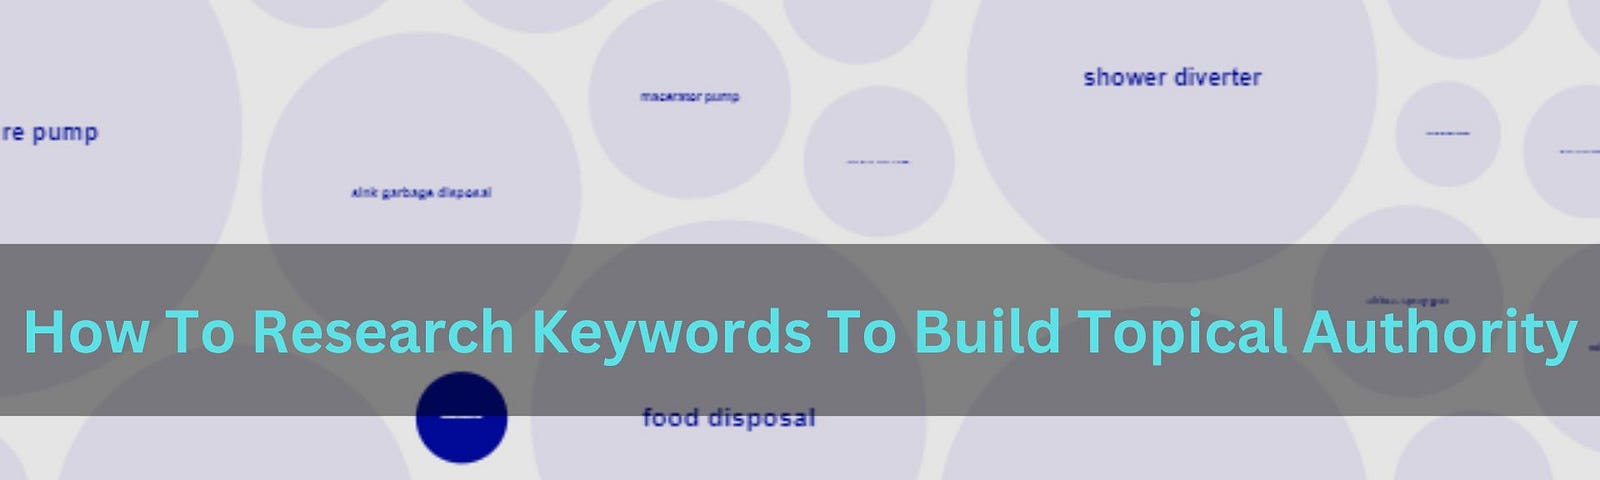 Keyword Research Method That Help Build Topical Authority